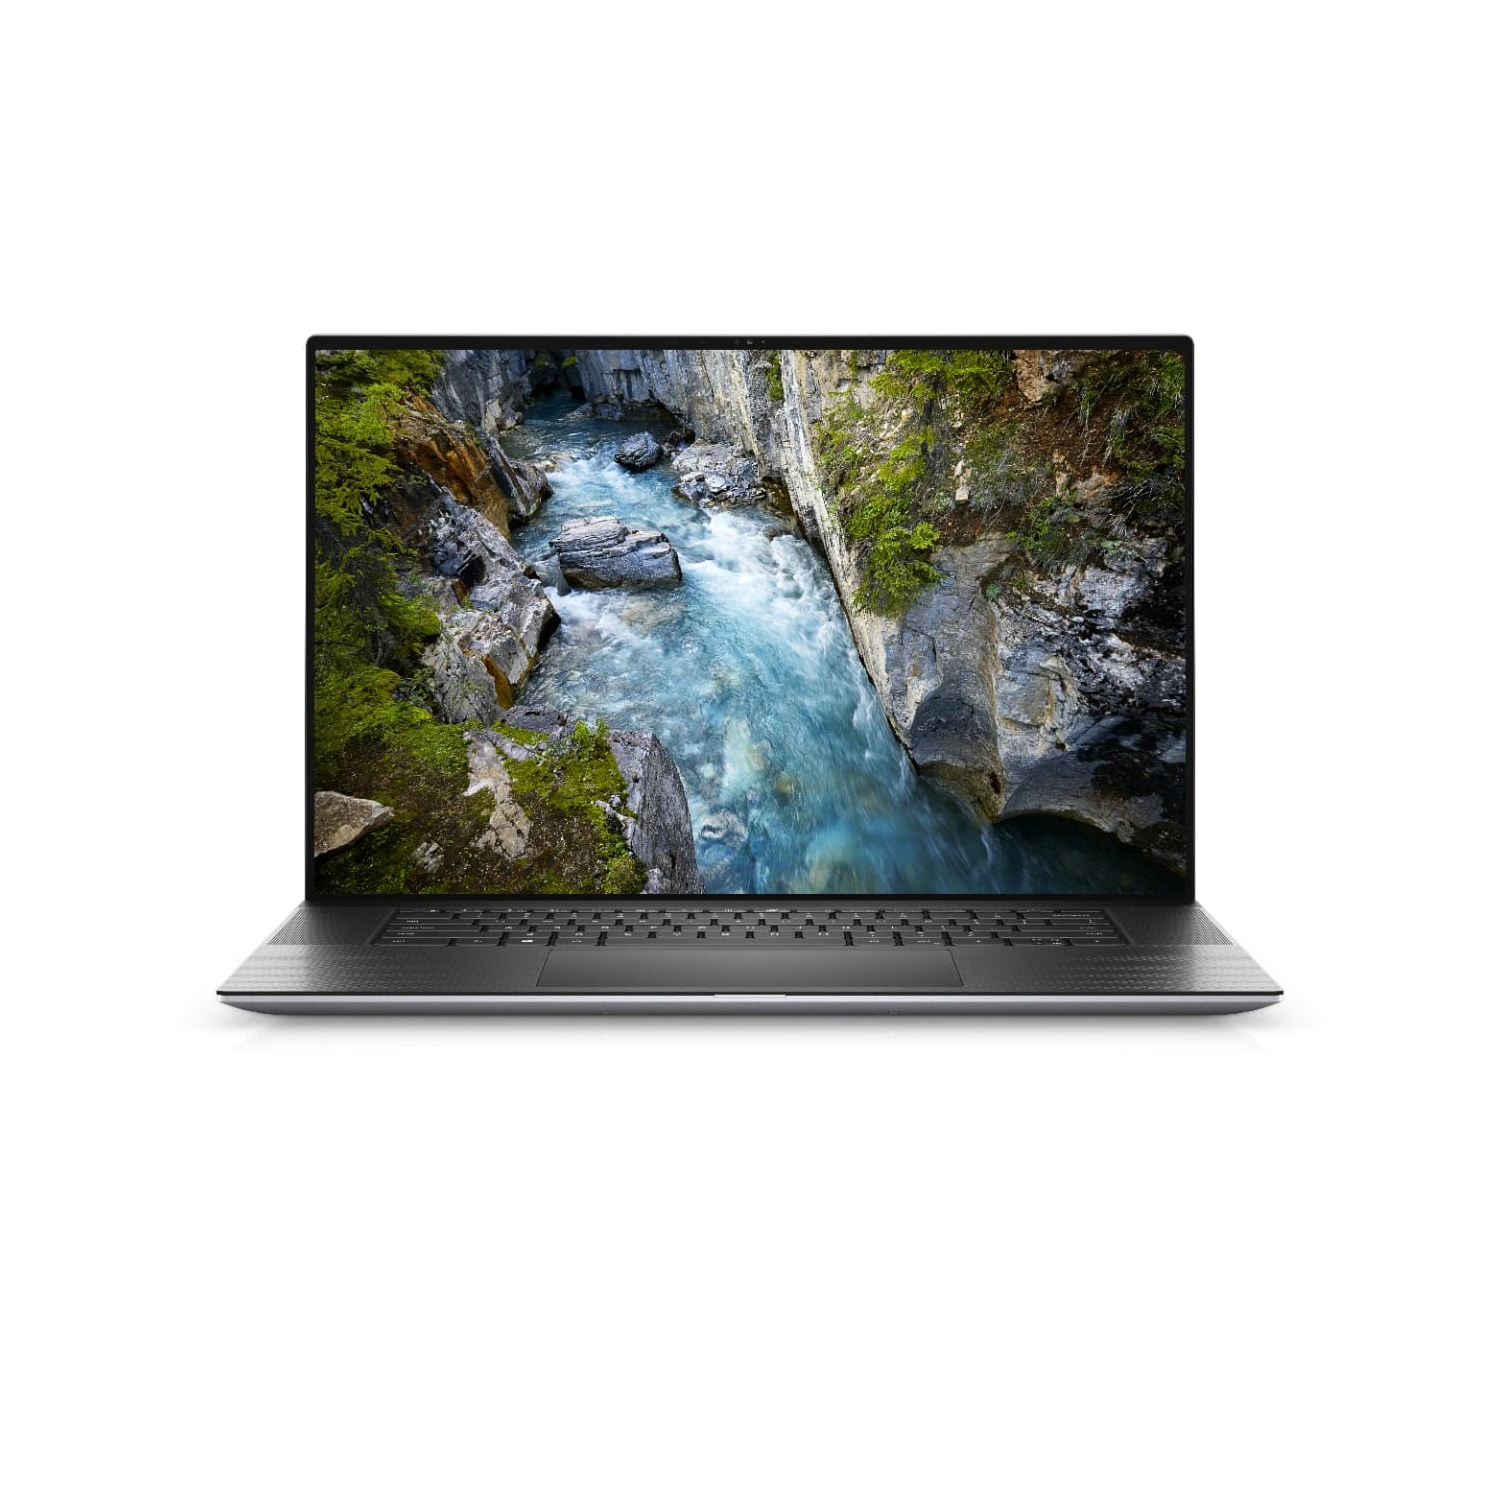 Refurbished (Excellent) - Dell Precision 5000 5750 Workstation Laptop (2020) | 17" 4K Touch | Core i9 - 256GB SSD - 32GB RAM - RTX 3000 | 5.3 GHz - 10th Gen CPU Certified